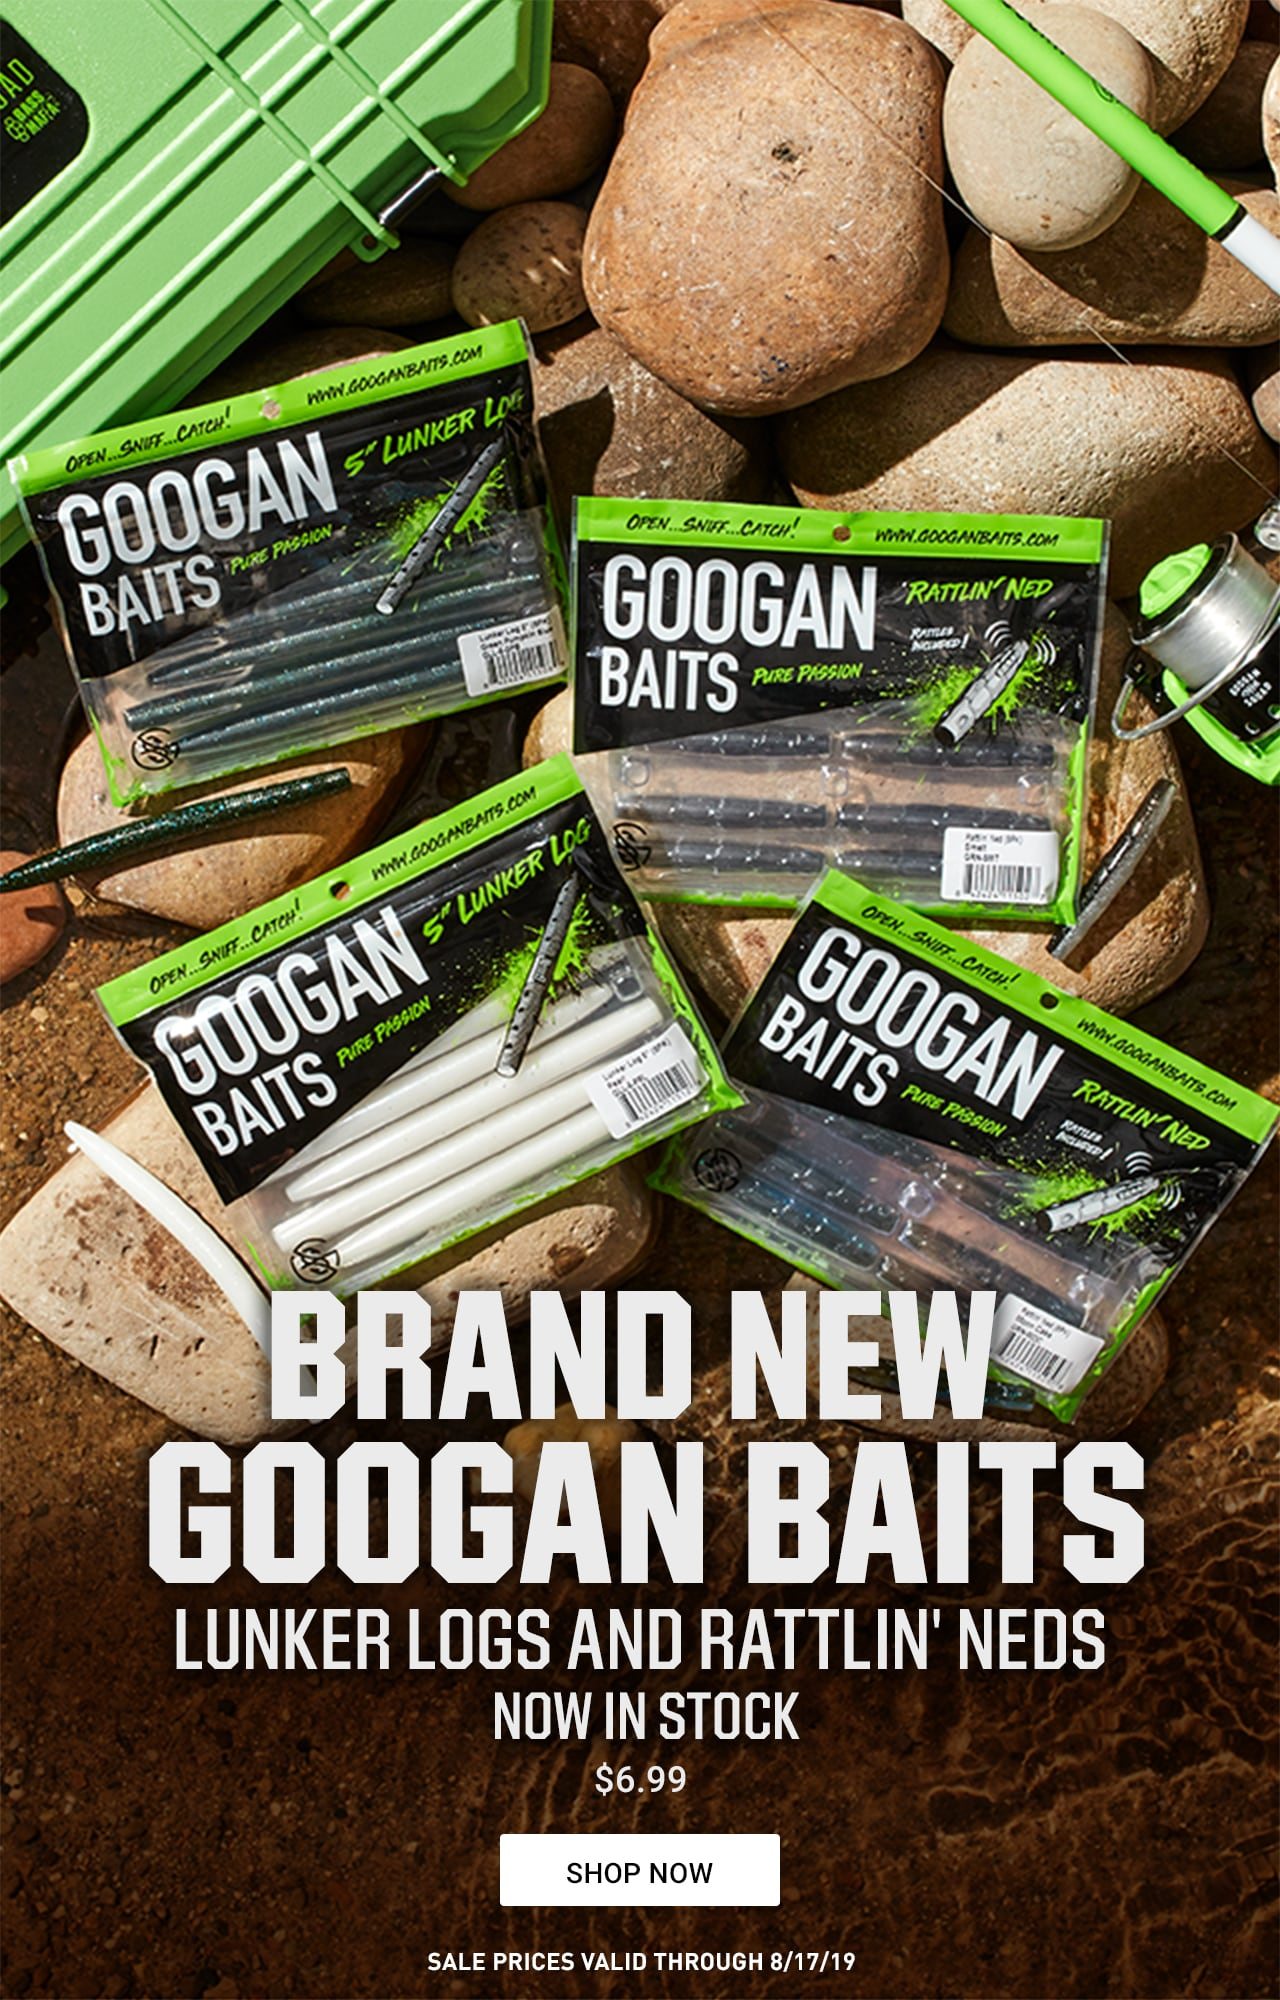 They're Here! Googan Baits Lunker Logs & Rattlin' Neds -- Now In